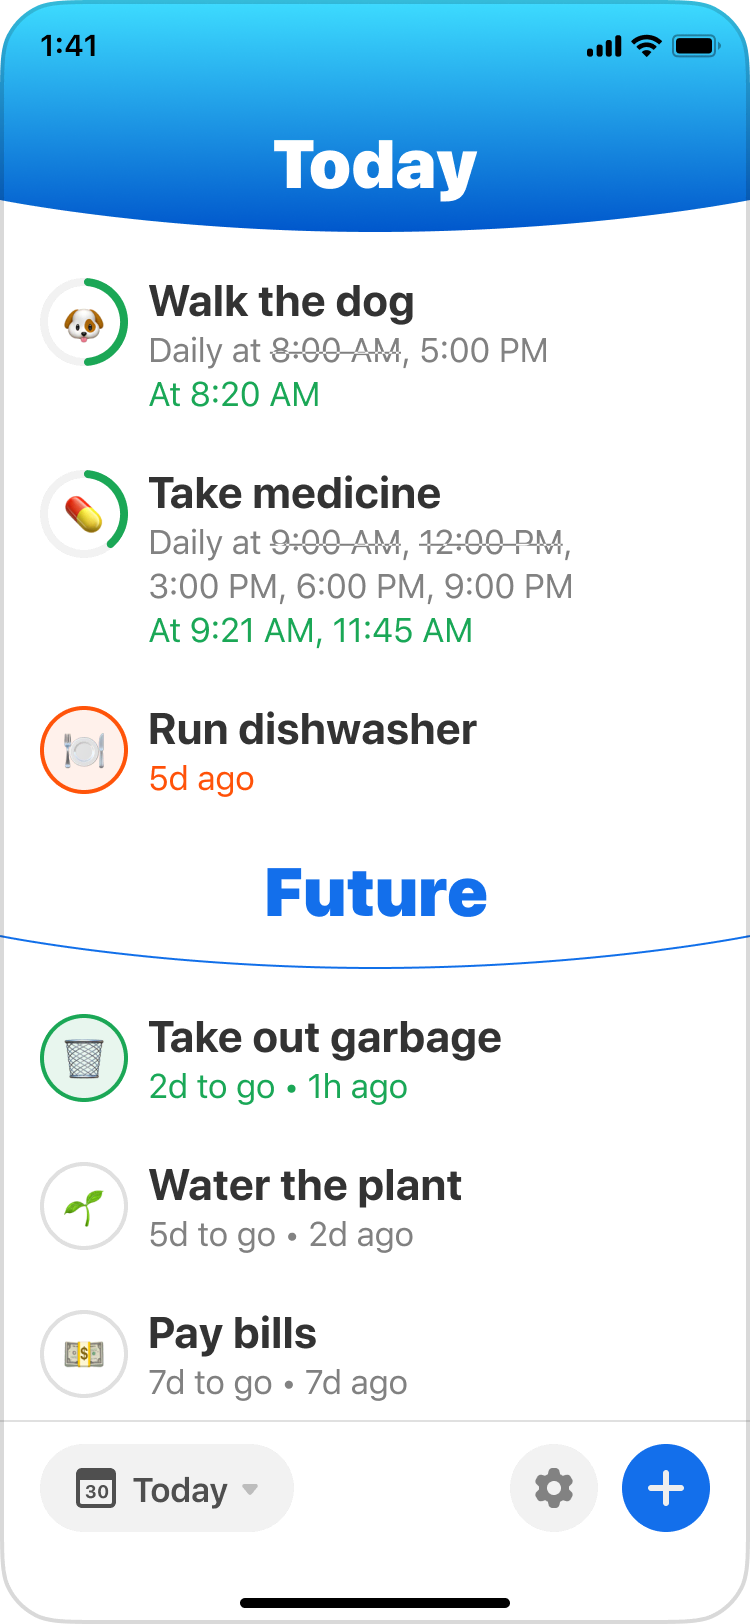 Mock of home screen with tasks under “today” and “future” headings